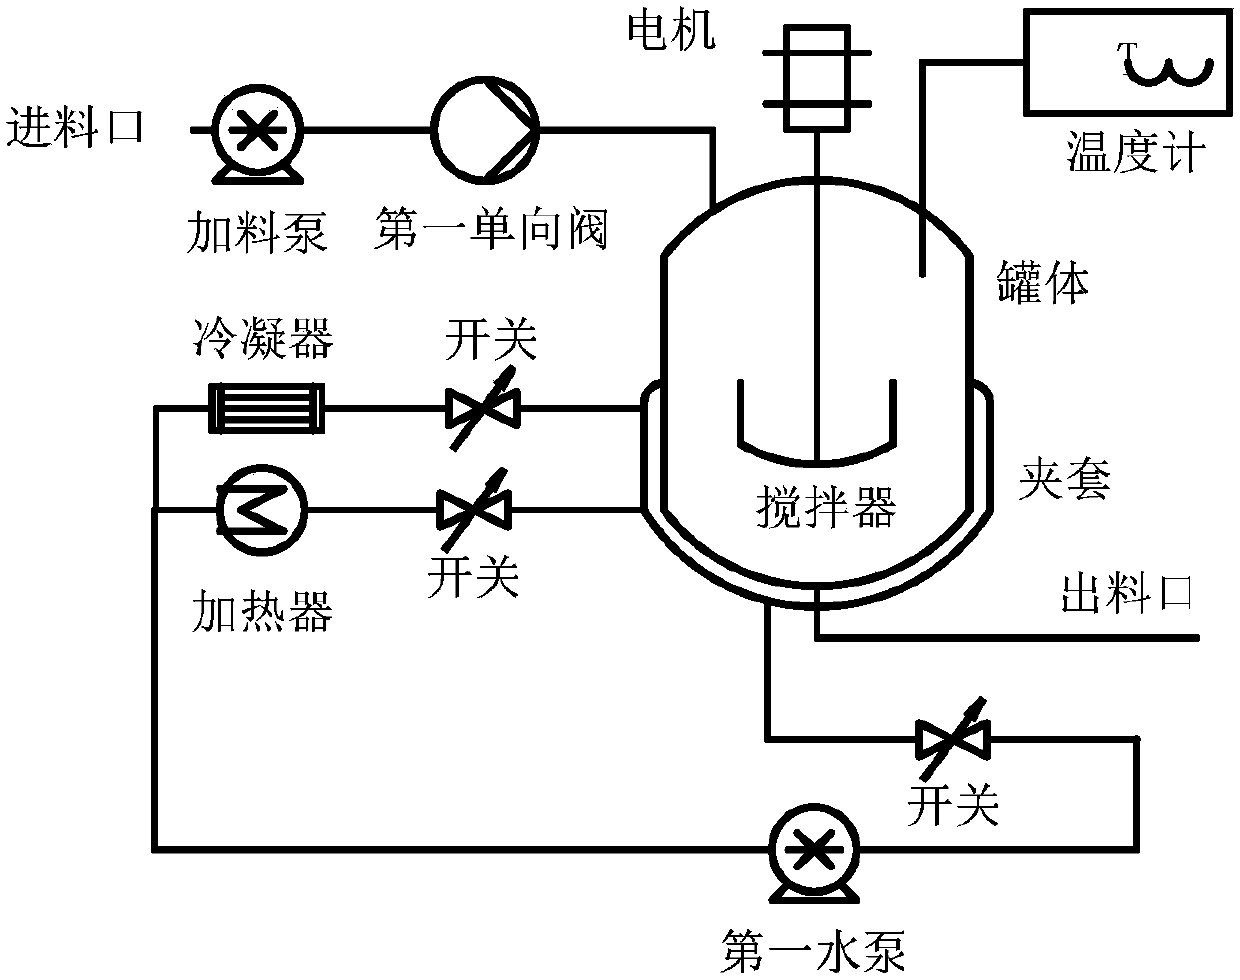 Chemical machinery system using vertical reactor